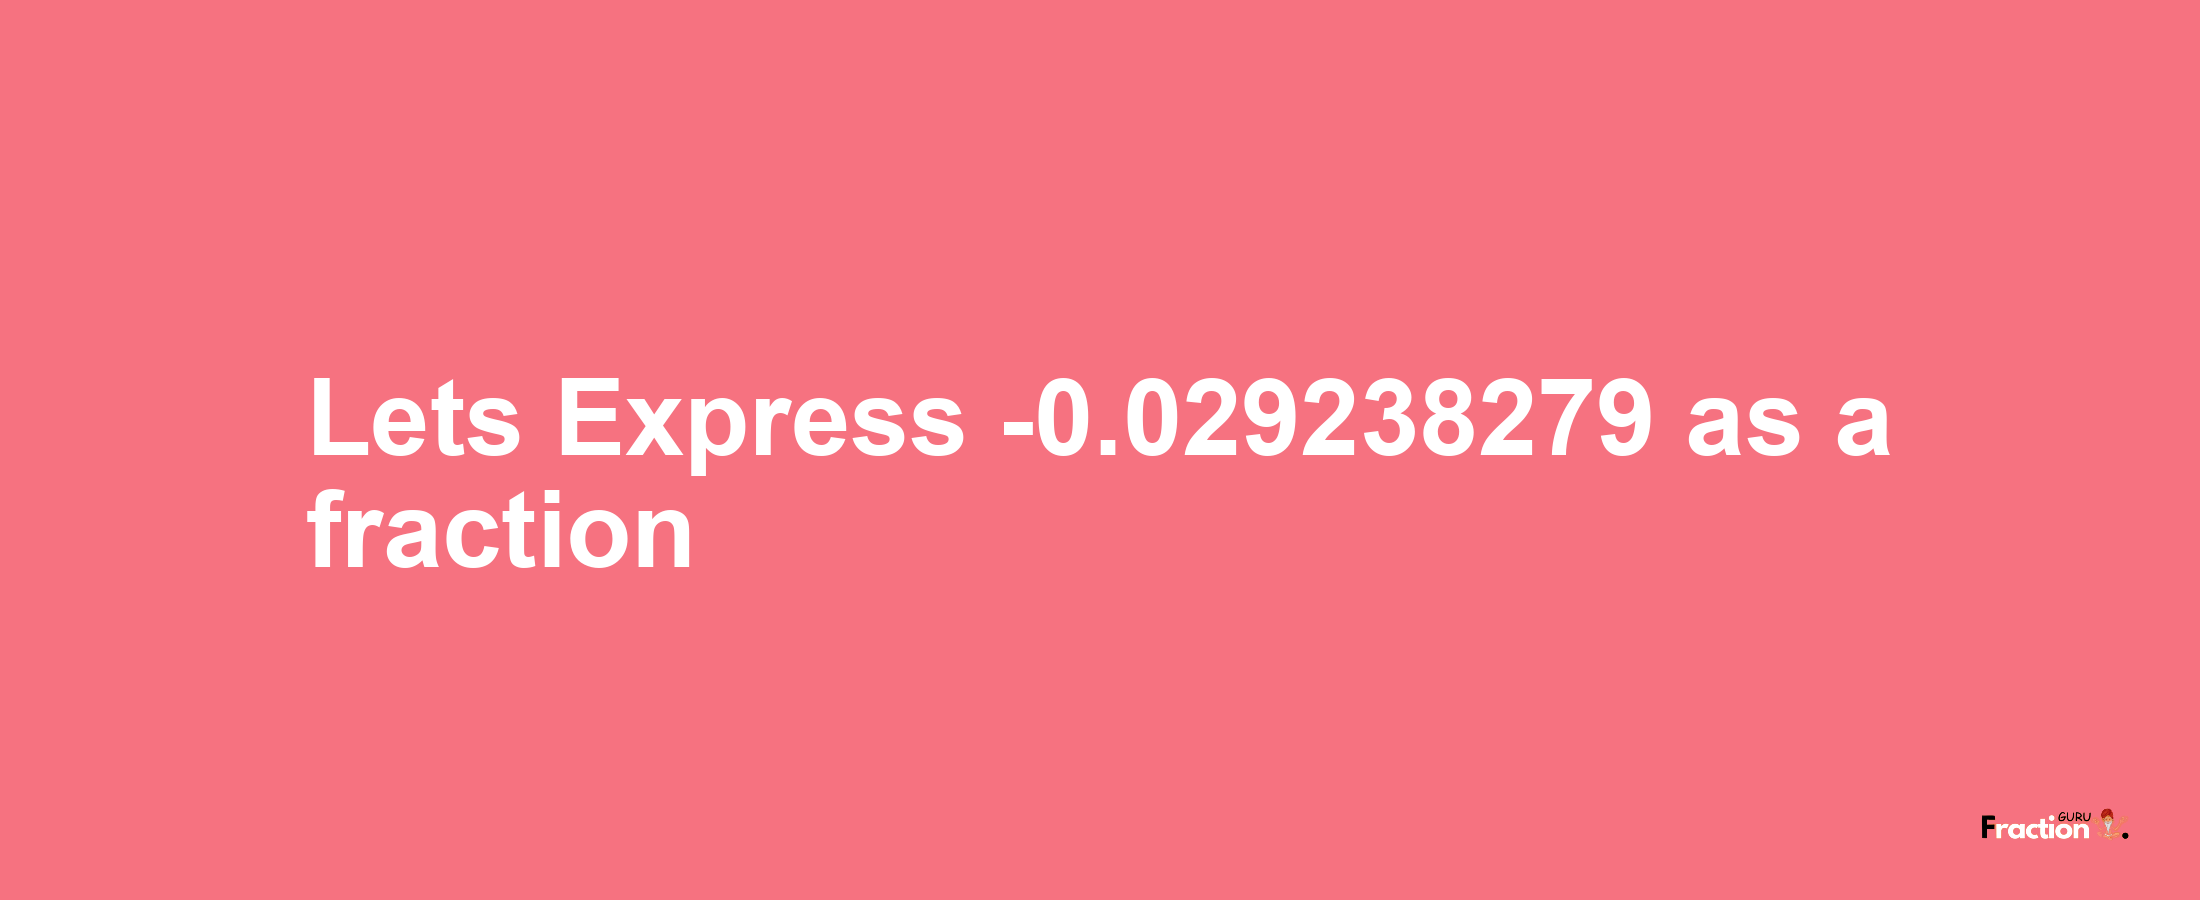 Lets Express -0.029238279 as afraction